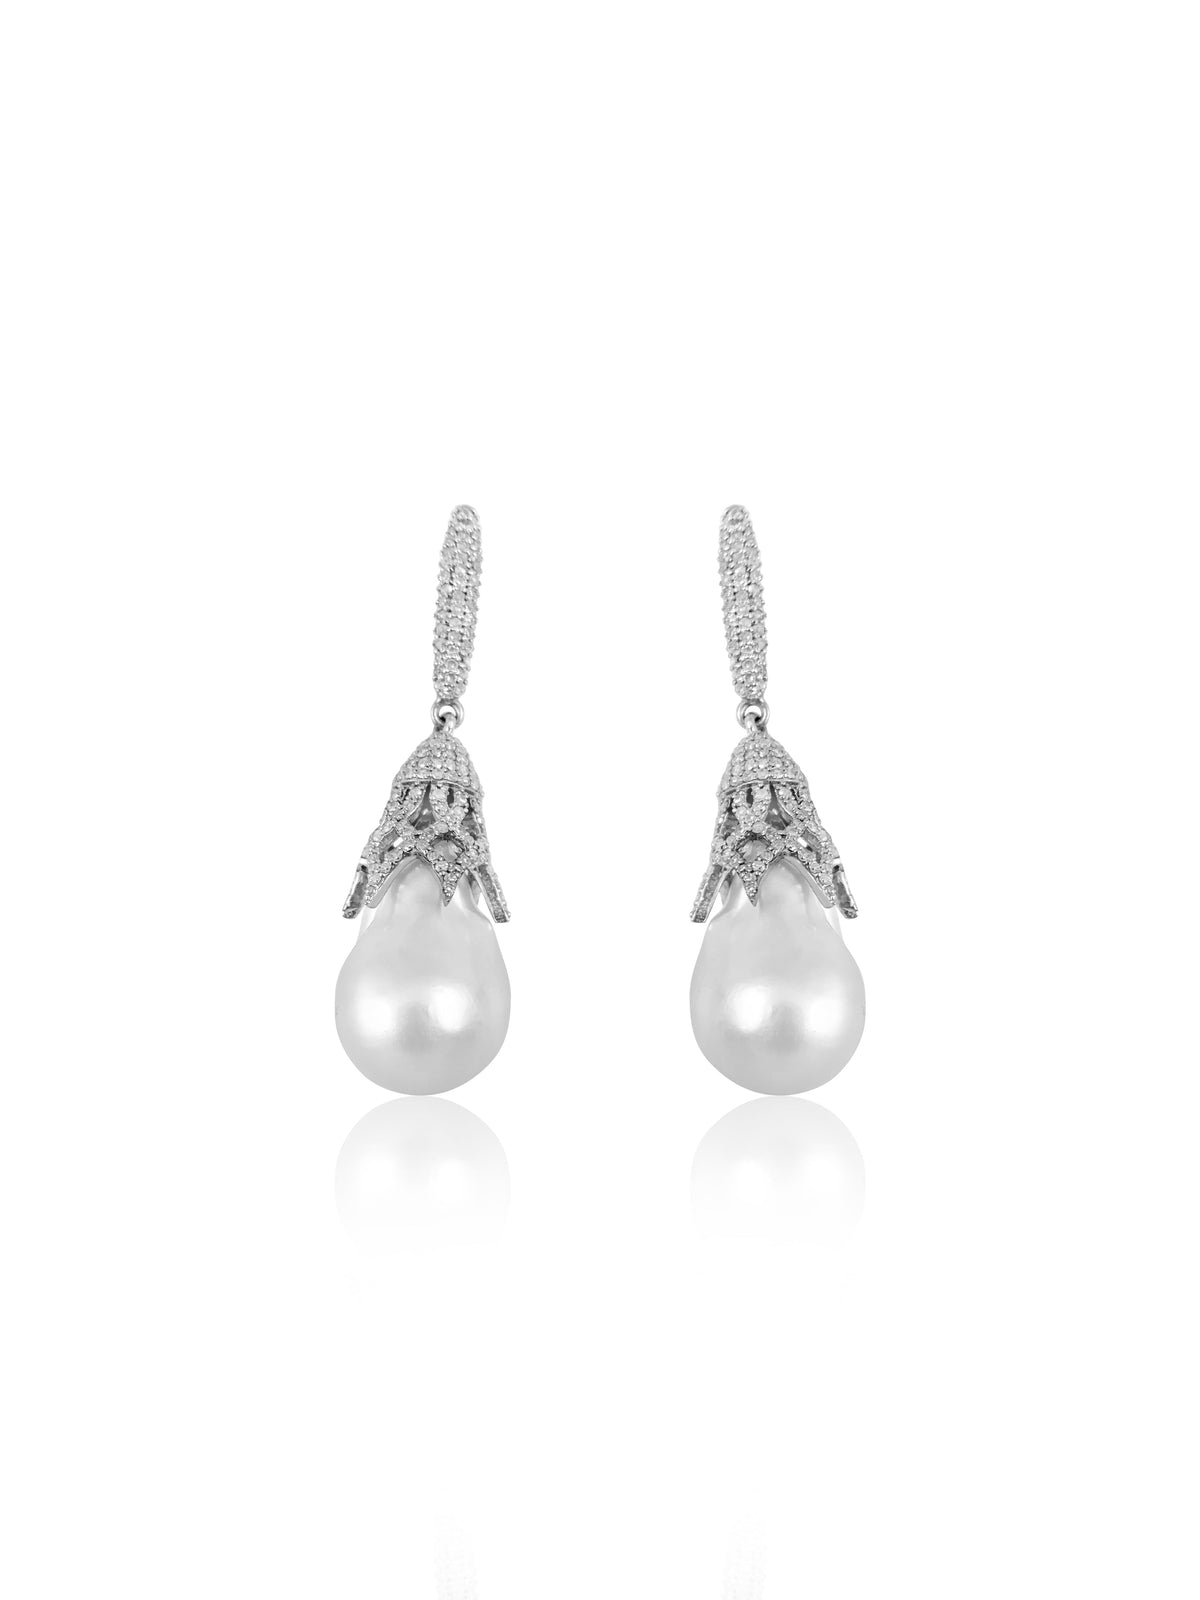 This pair of earrings are perfect for Diamonds & Baroque Pearl, this design gives the piece an elegant touch.  Diamond: 2.14 ct Pearl Barroque: 60.38 Silver with Rhodium Plated weight: 8.28 grams Gold Post